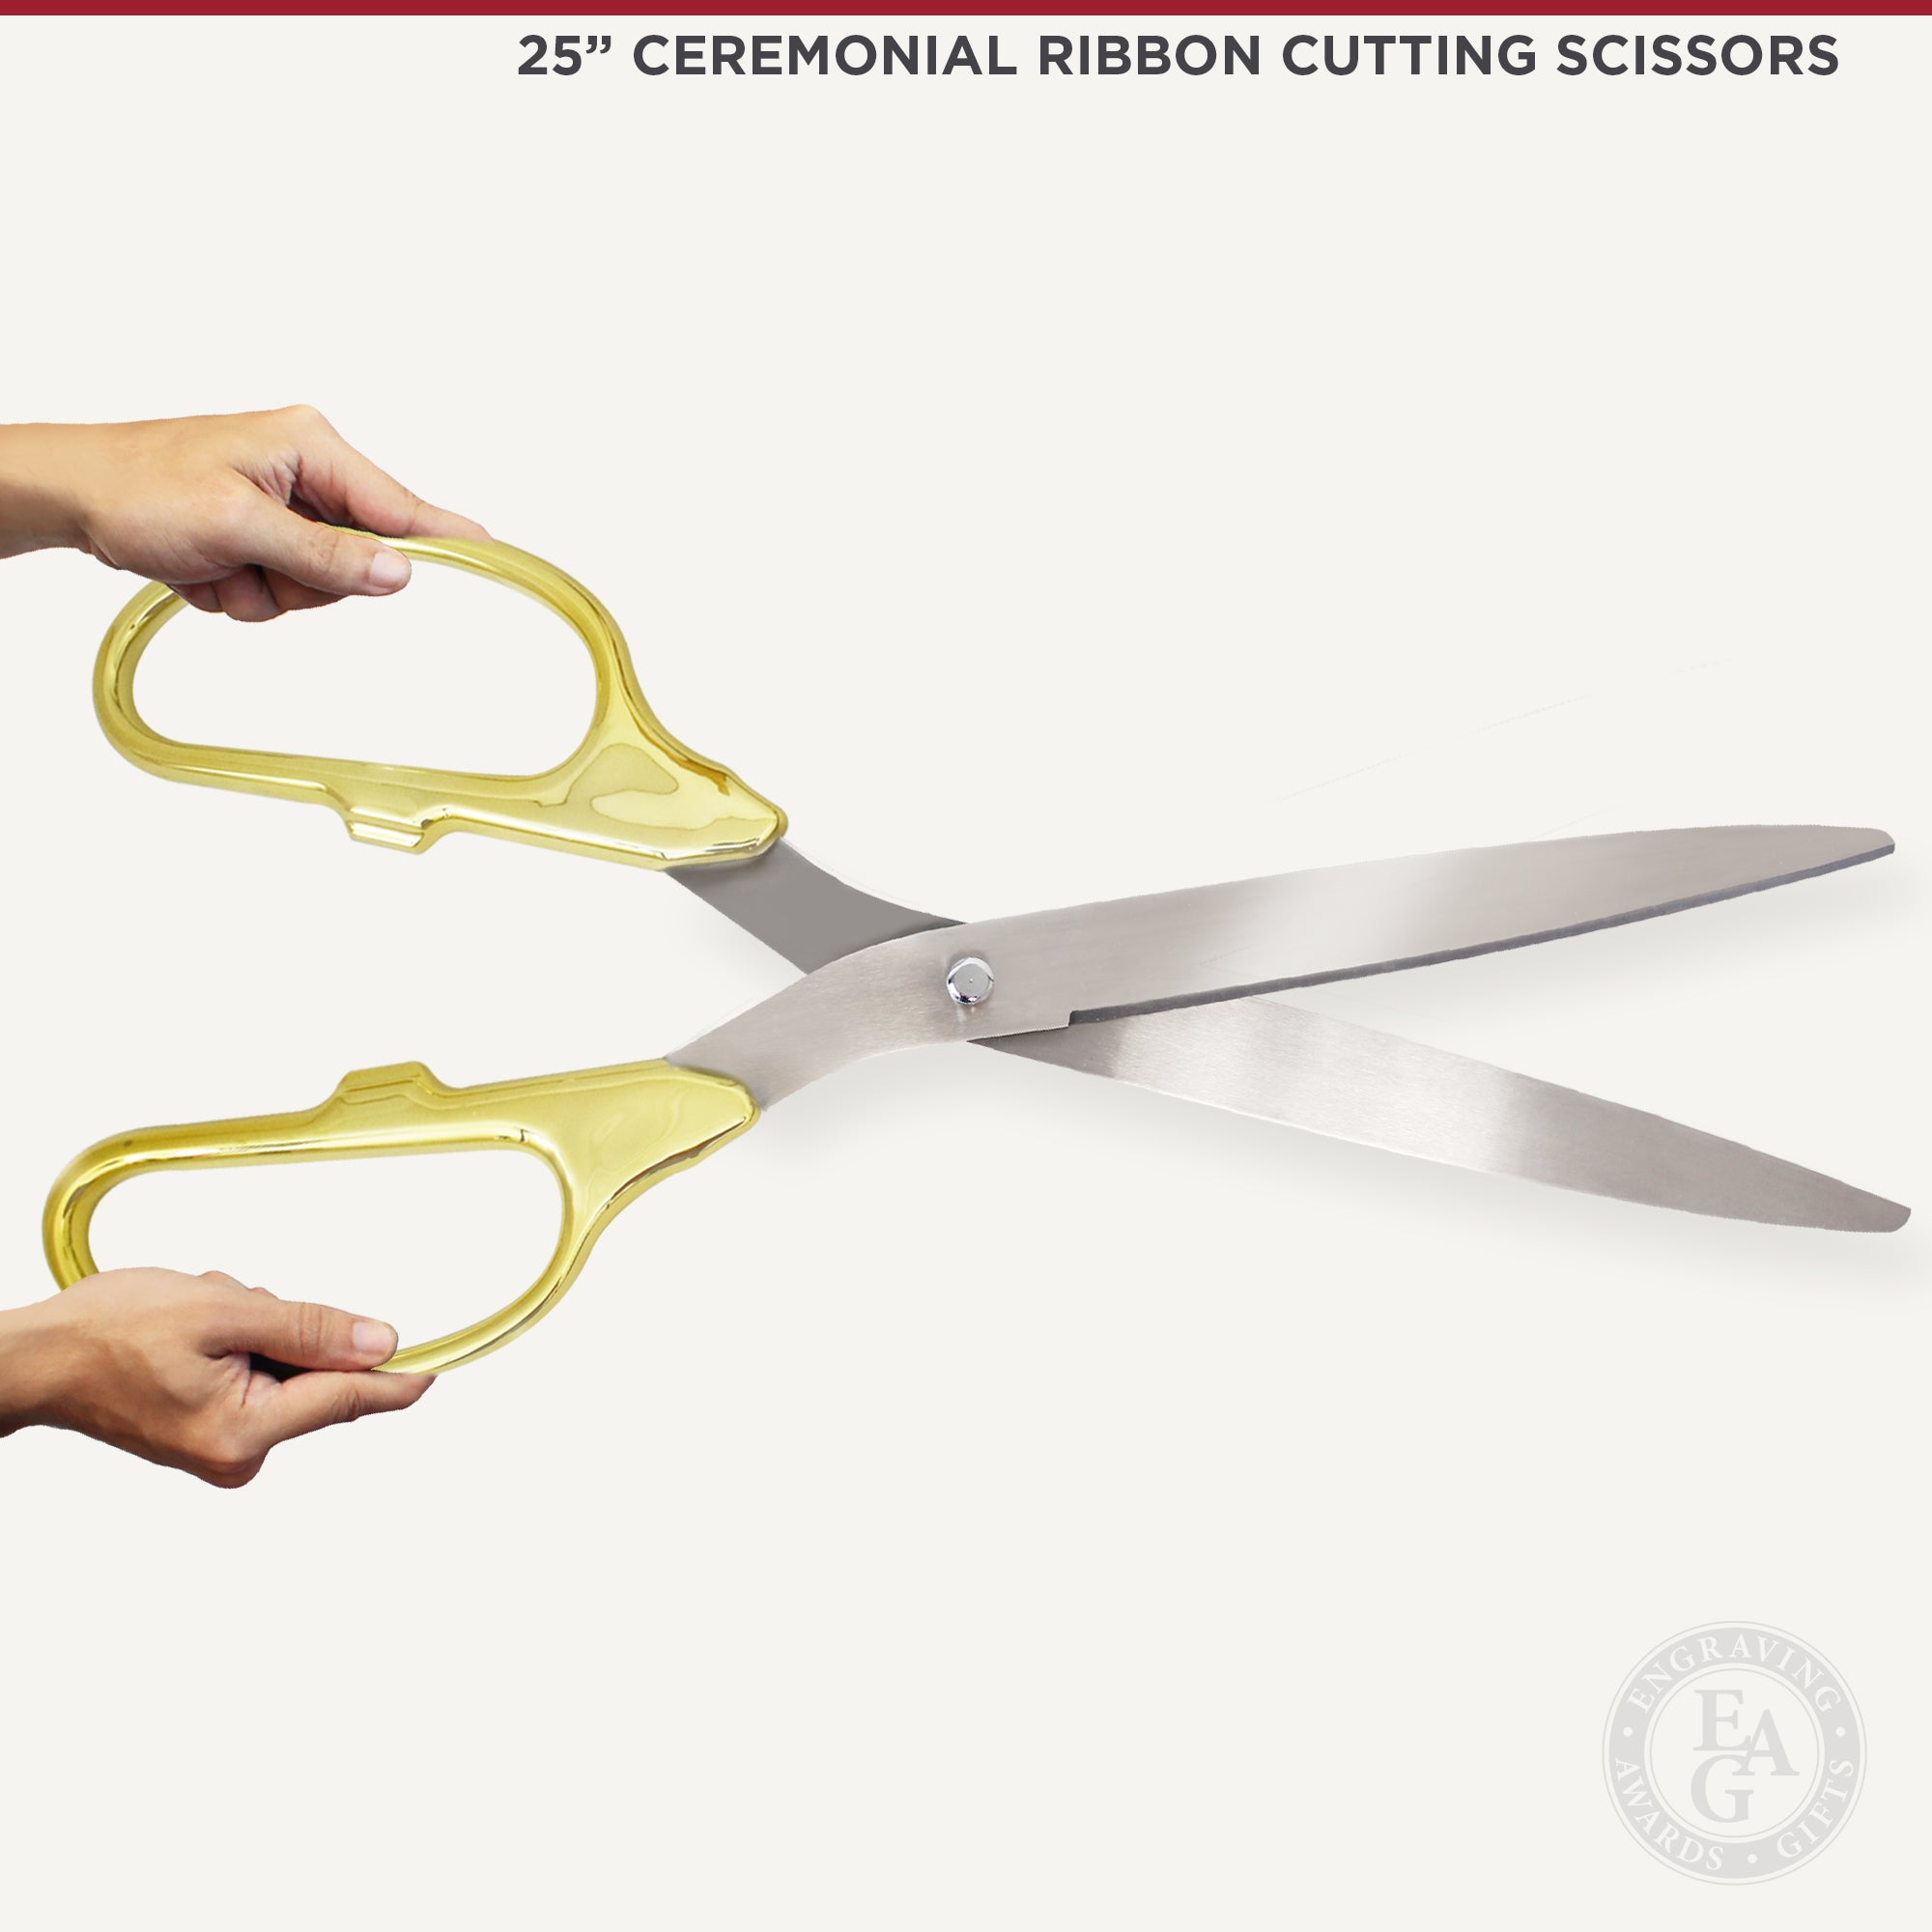 Grand Opening Red Ribbon Cutting Ceremony Kit - 25 Giant Scissors